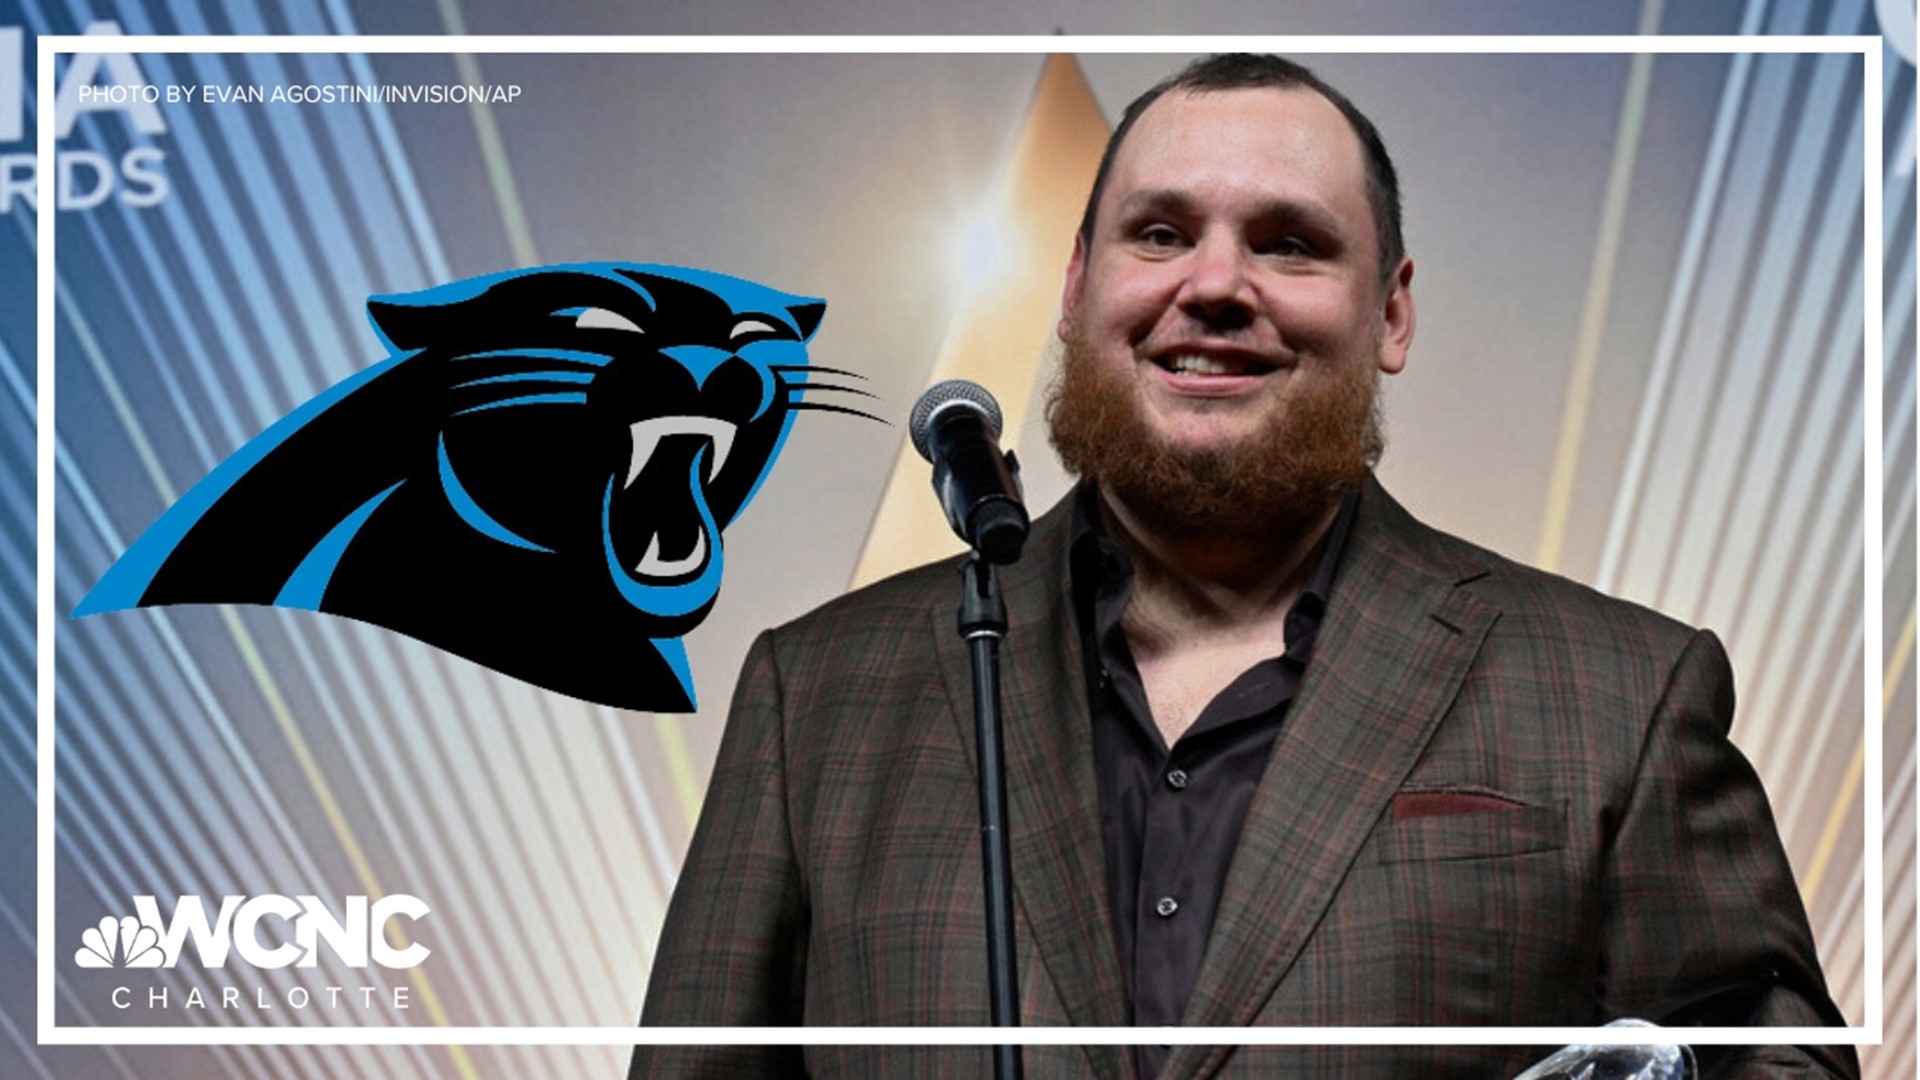 North Carolina native and country star Luke Combs took to social media to voice his disappointment with recent Carolina Panthers offseason moves.